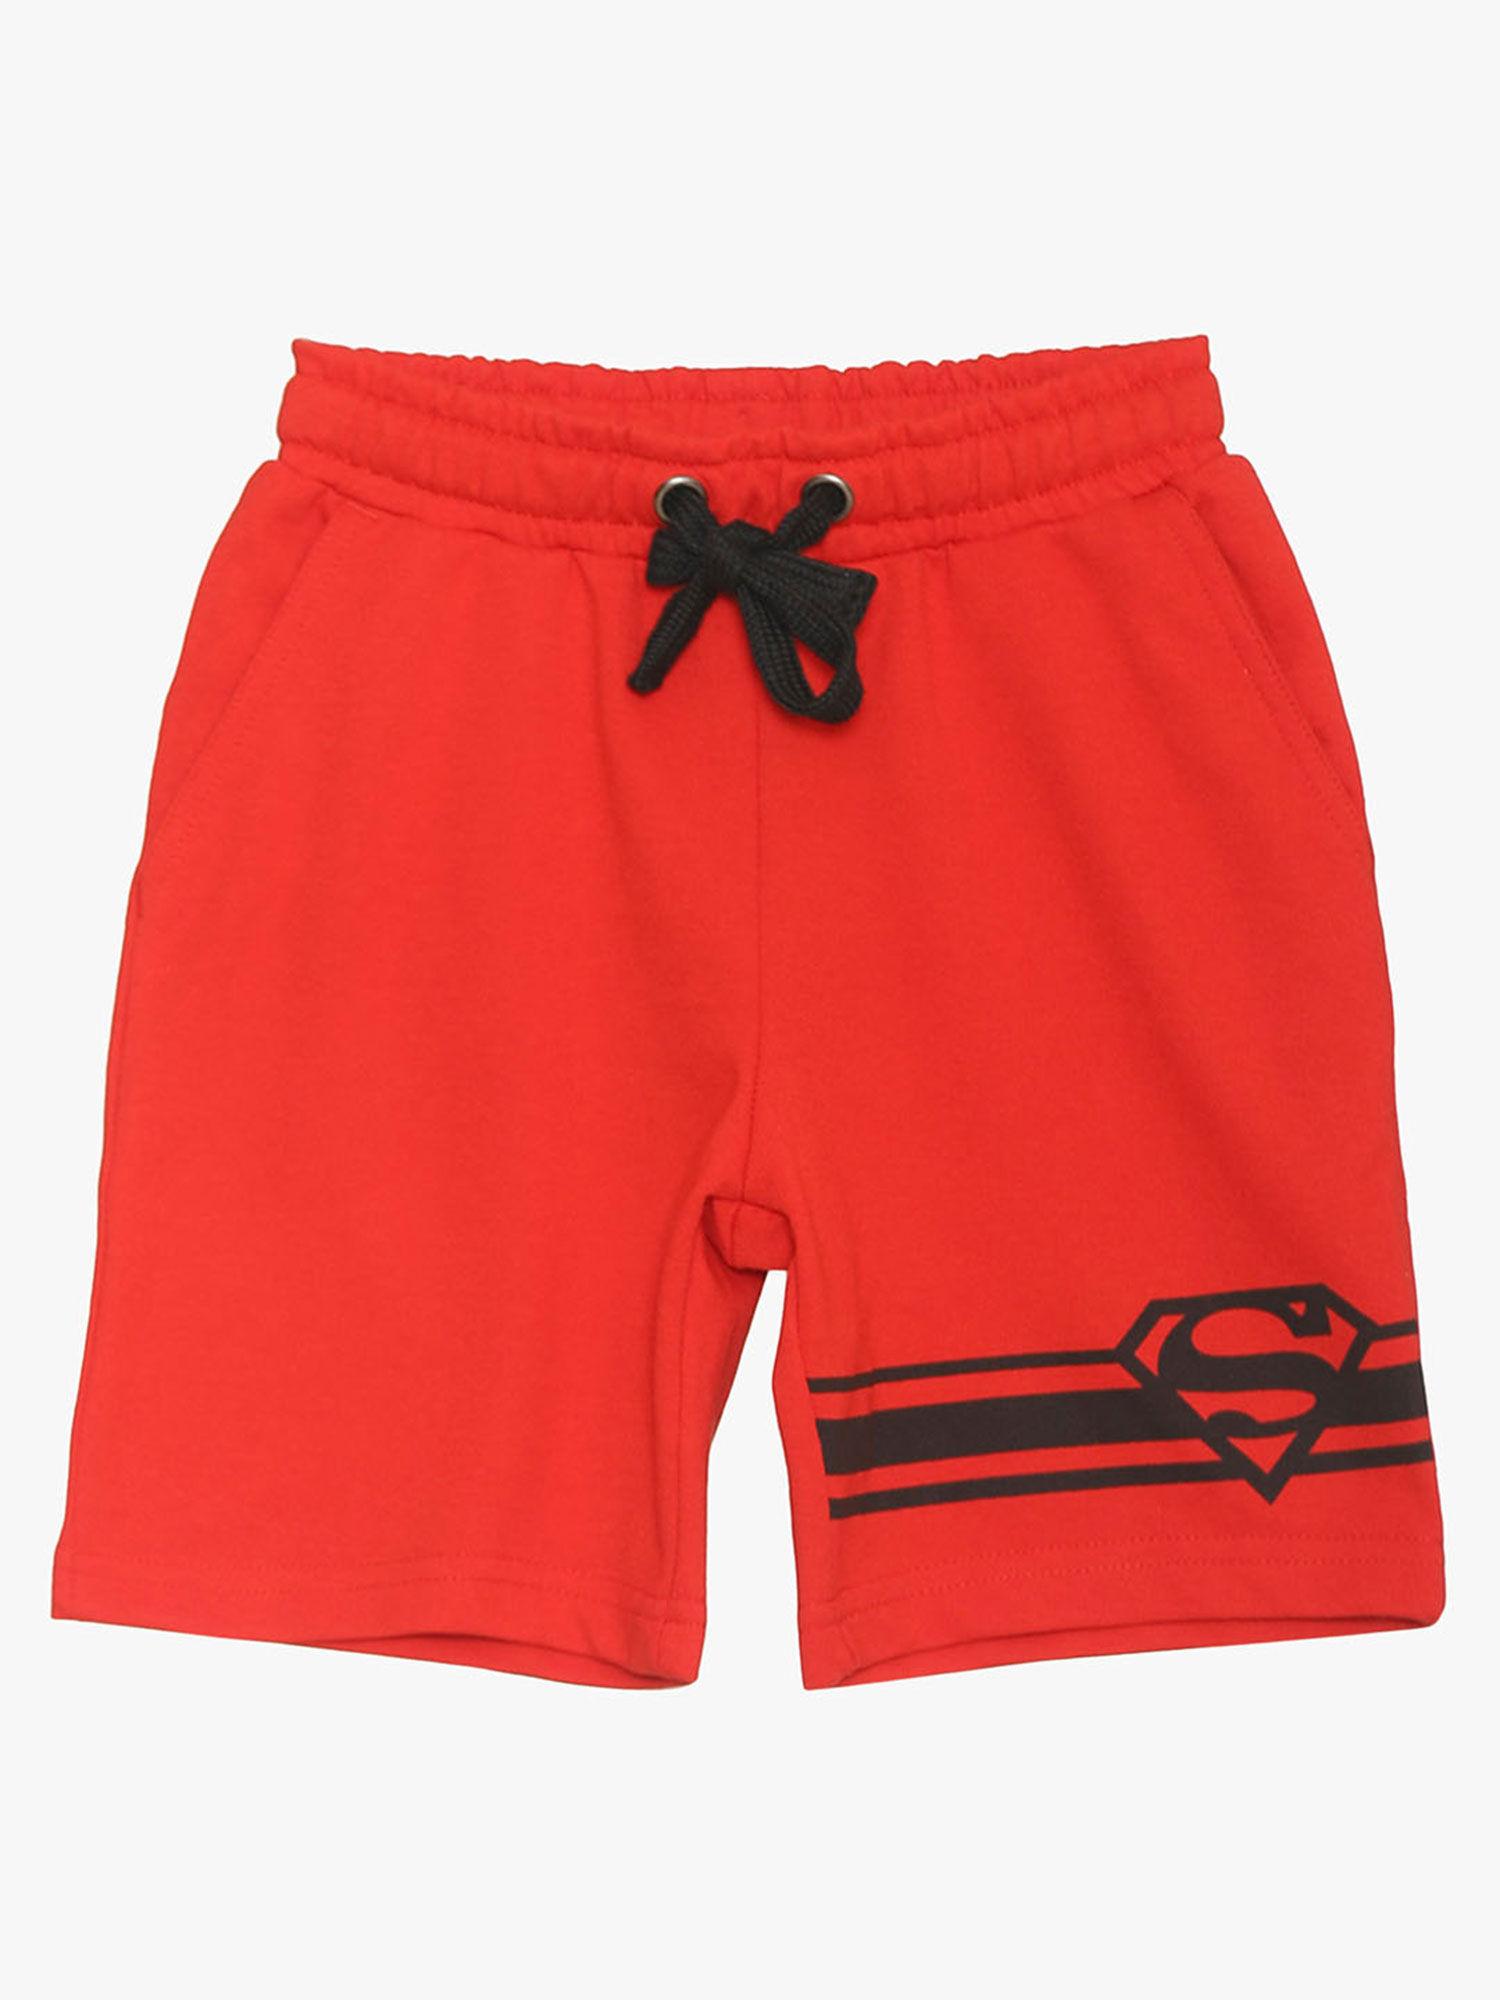 superman-red-shorts